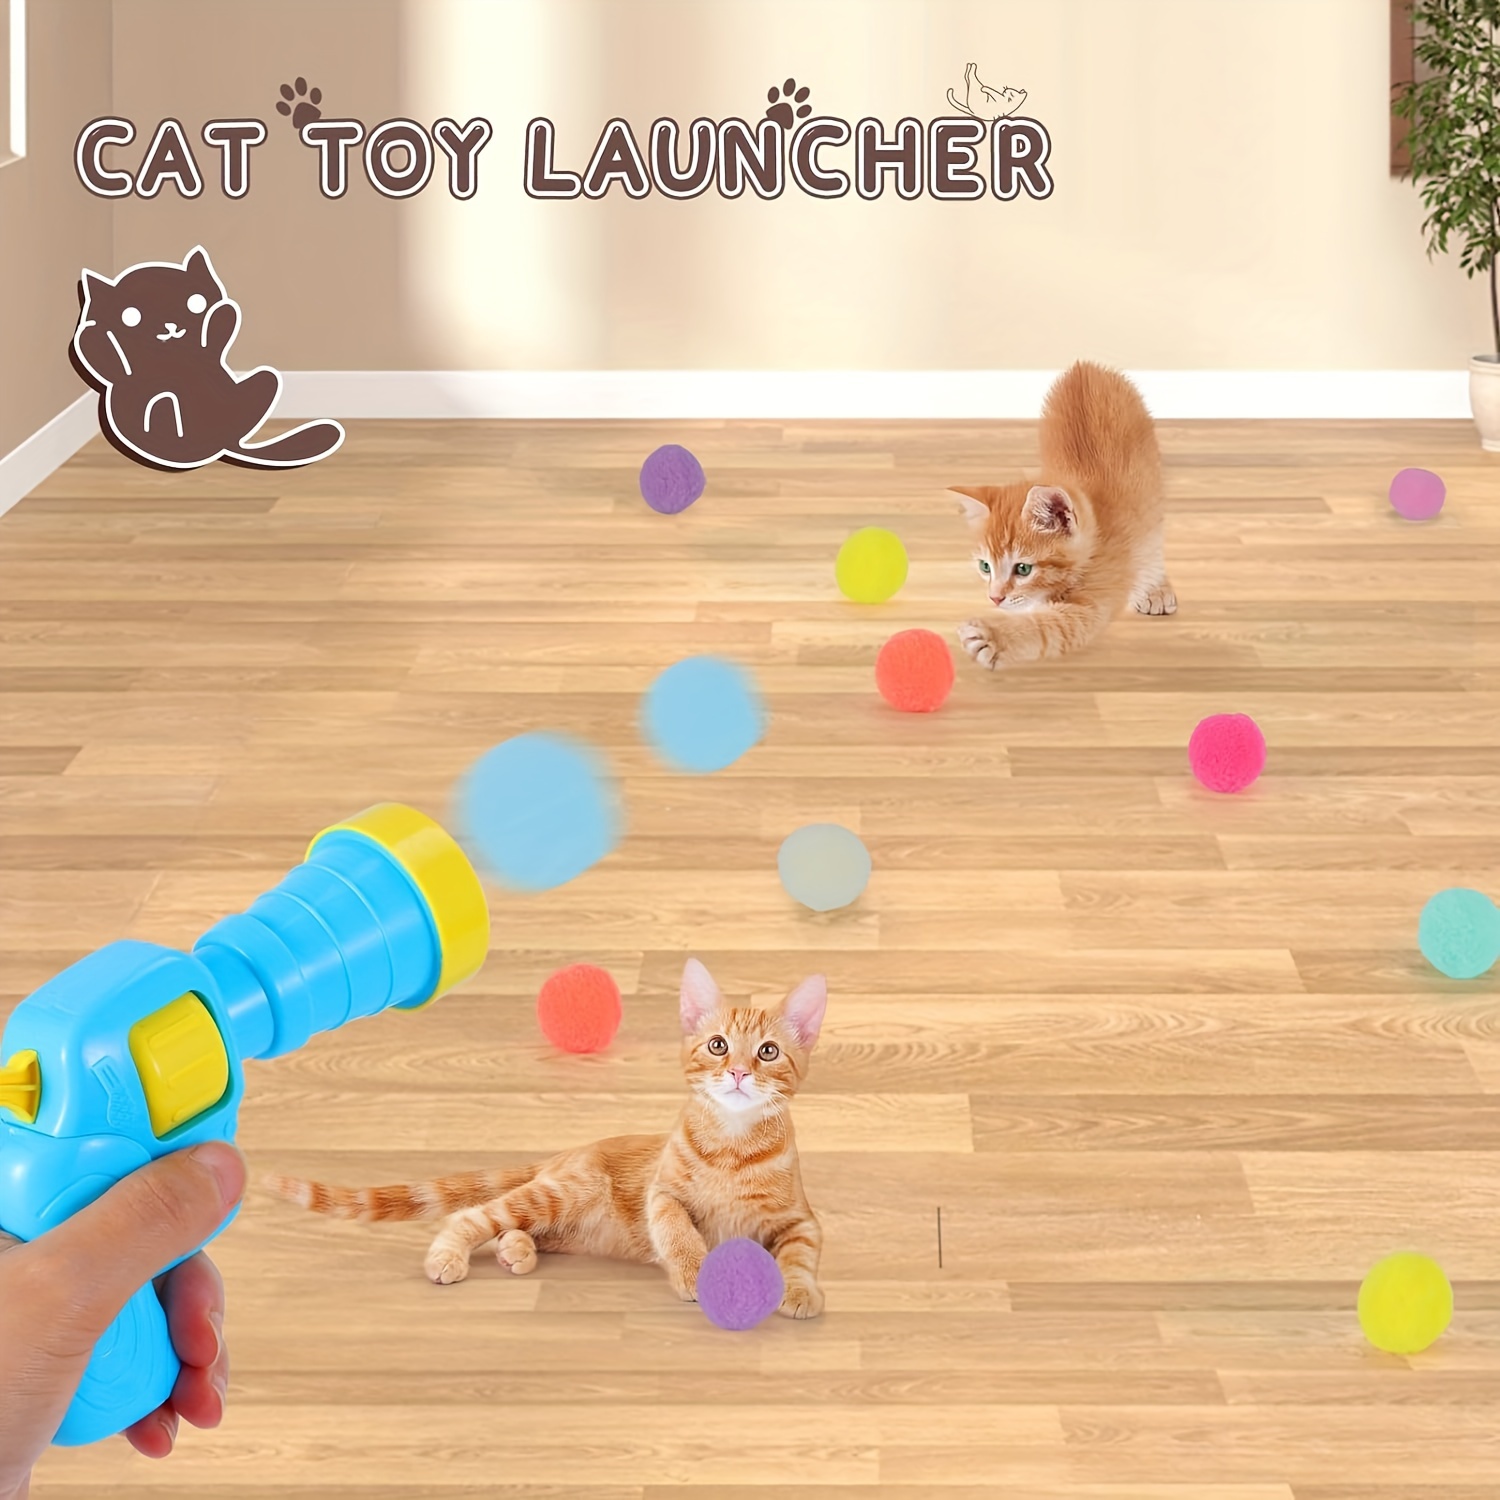 OUDDODU Cat Toys Balls with Launcher,Interactive Fuzzy Soft Balls